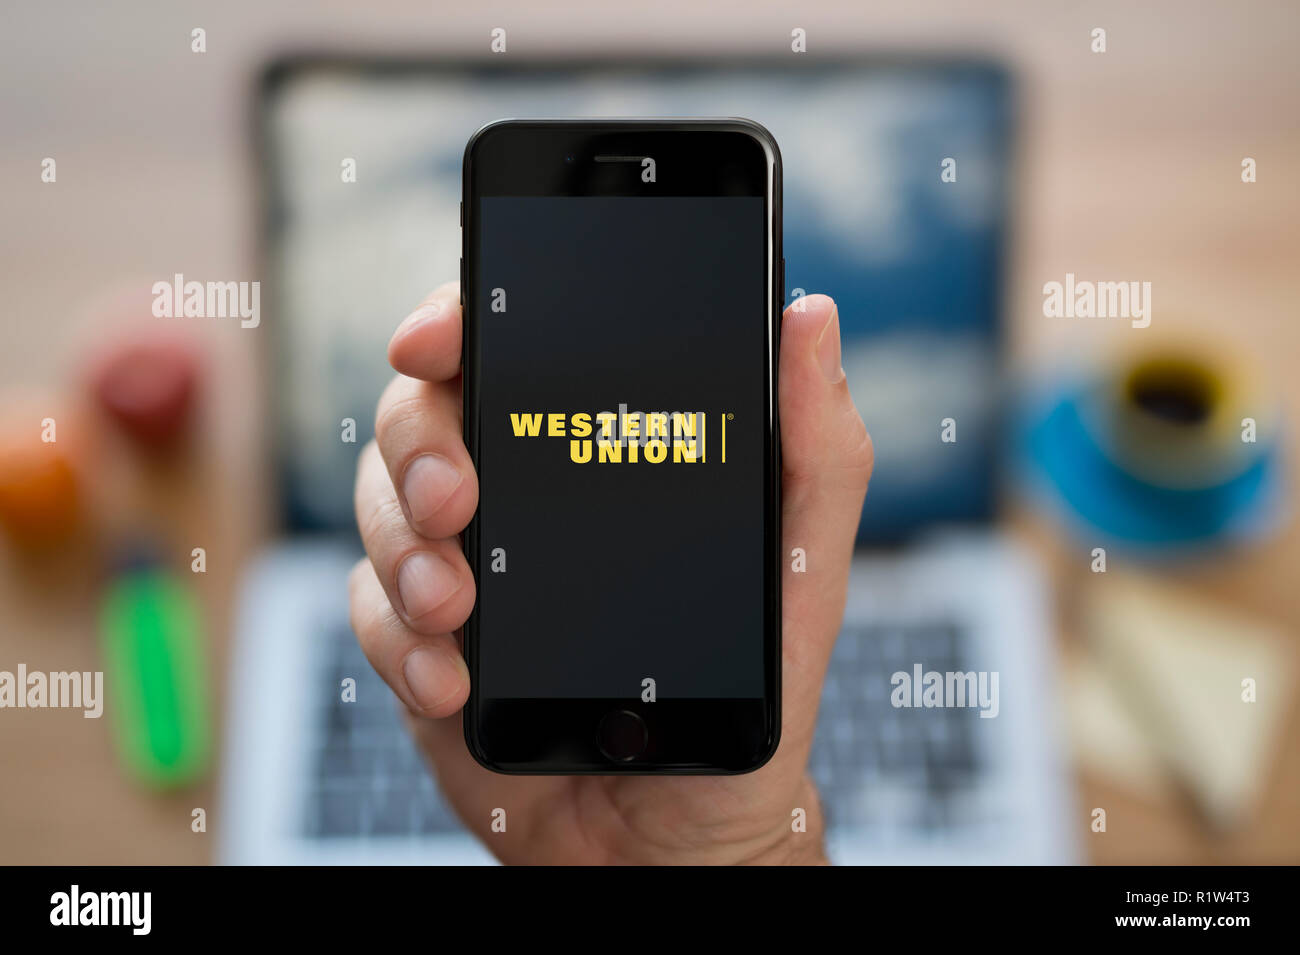 A man looks at his iPhone which displays the Western Union logo, while sat at his computer desk (Editorial use only). Stock Photo